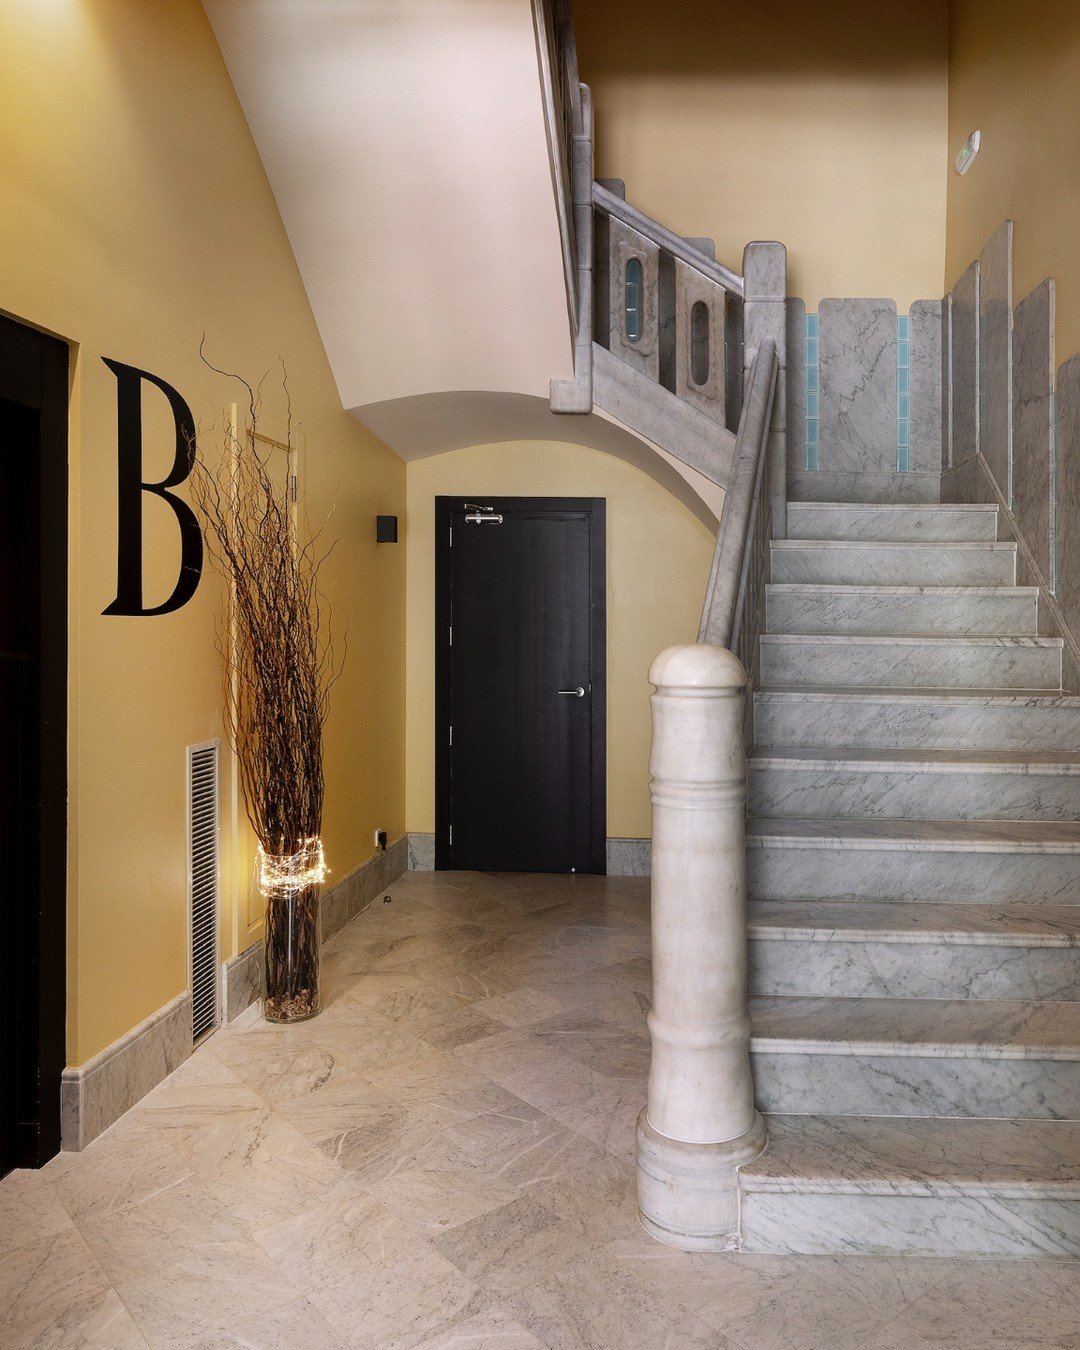 Can you imagine entering your home and being greeted by an british house style entrance? At Casa Mercader this is possible, next to a majestic solid marble staircase that leads you to the comfort of our long-stay apartments. Come and discover much mo